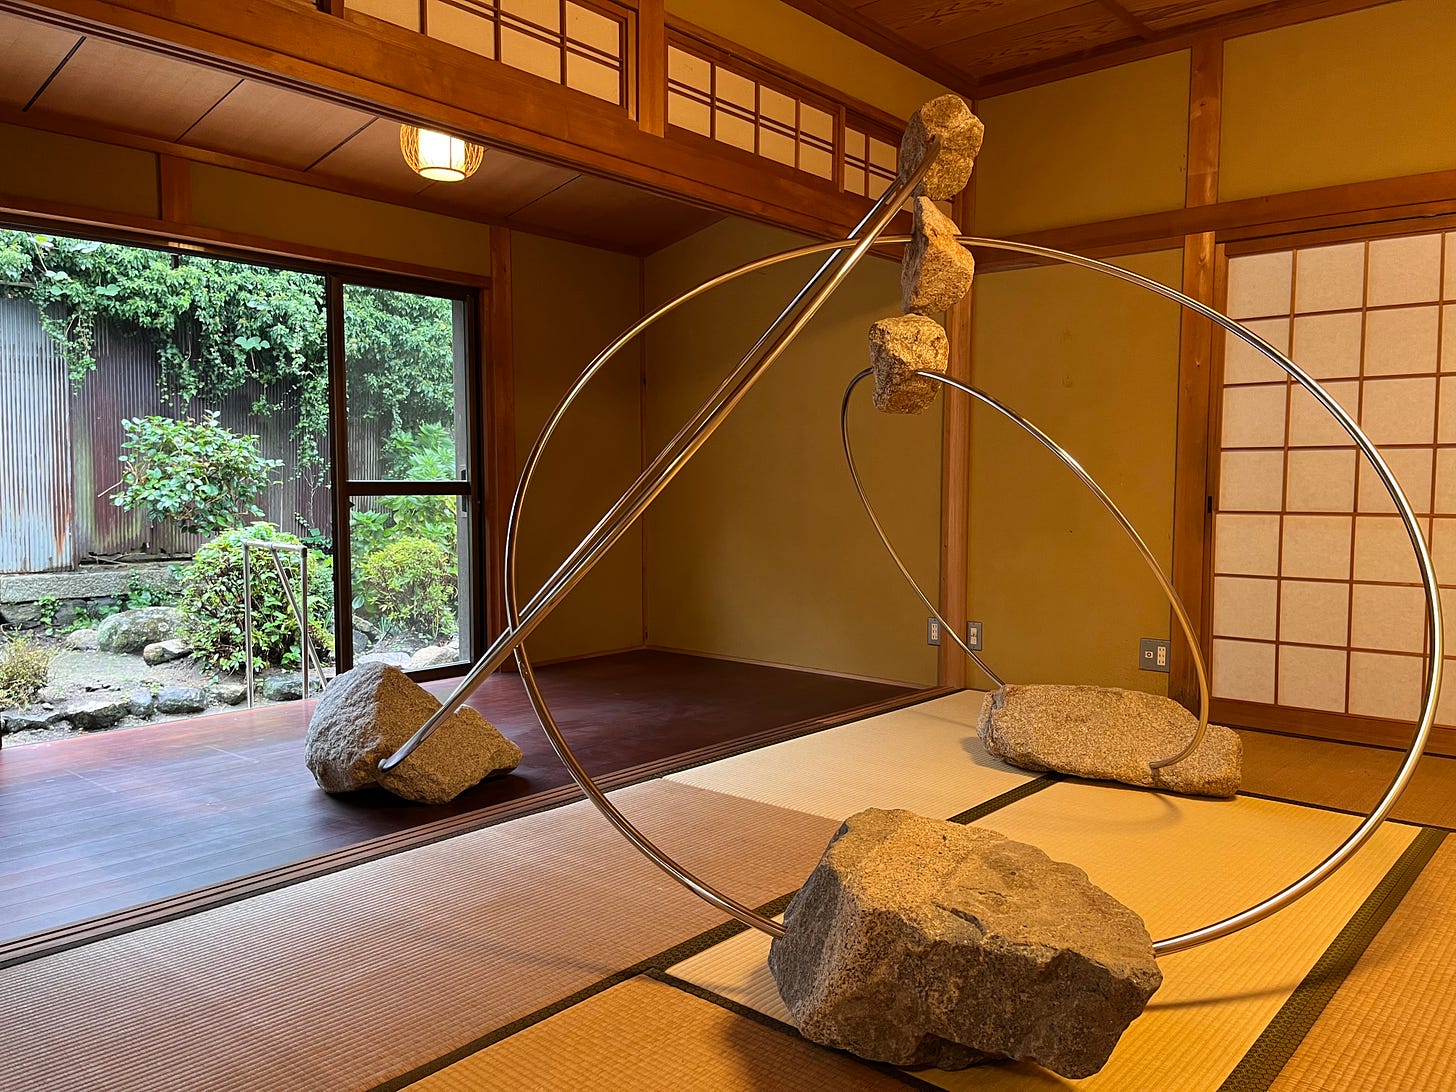 a sculpture comprising rocks on big metal rings touching inside a tatami room